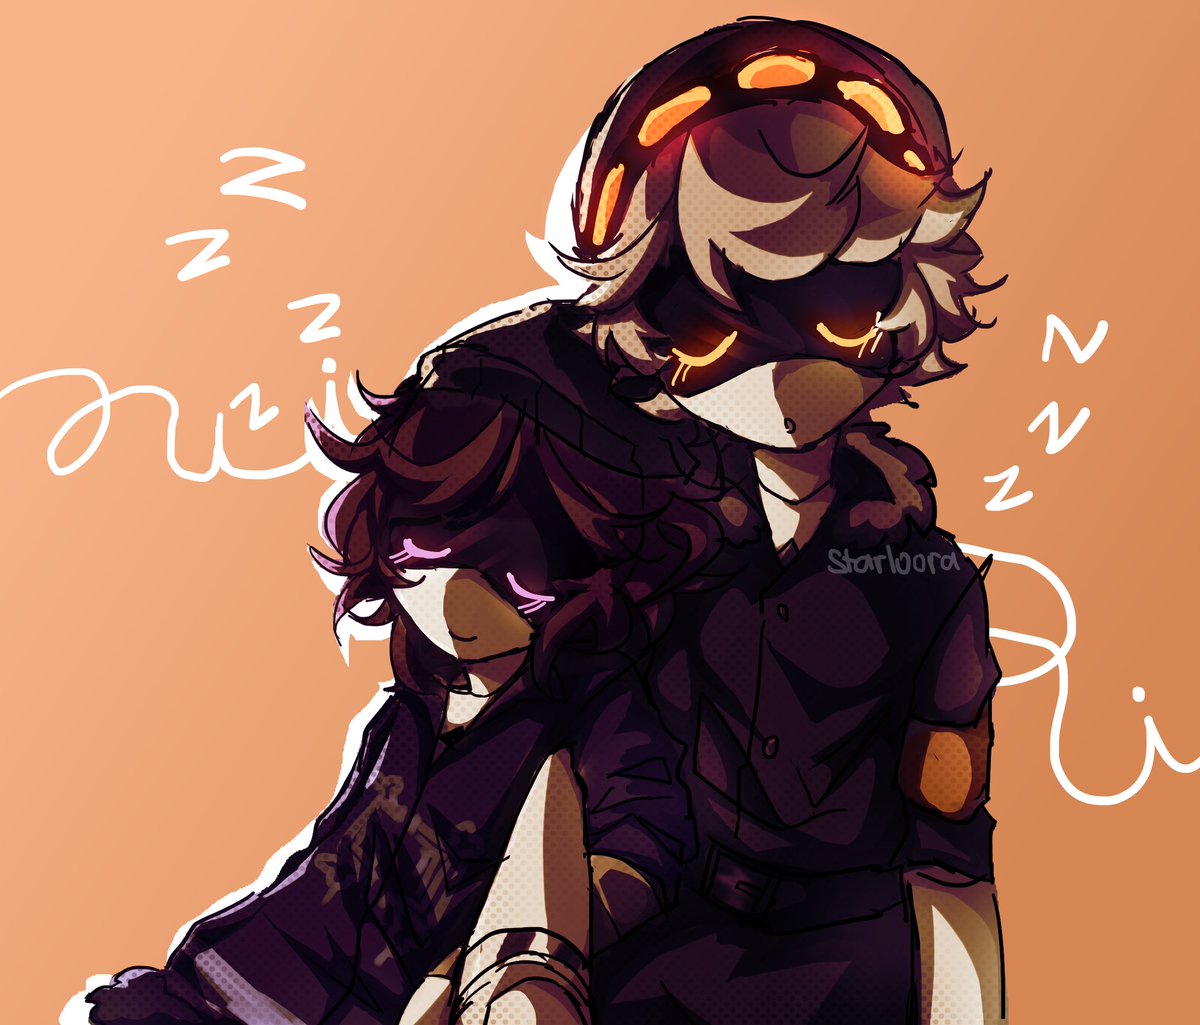 i like n x uzi but this can be platonic if you want! they're just sleeping after all
#murderdrones #nuzi #nxuzi